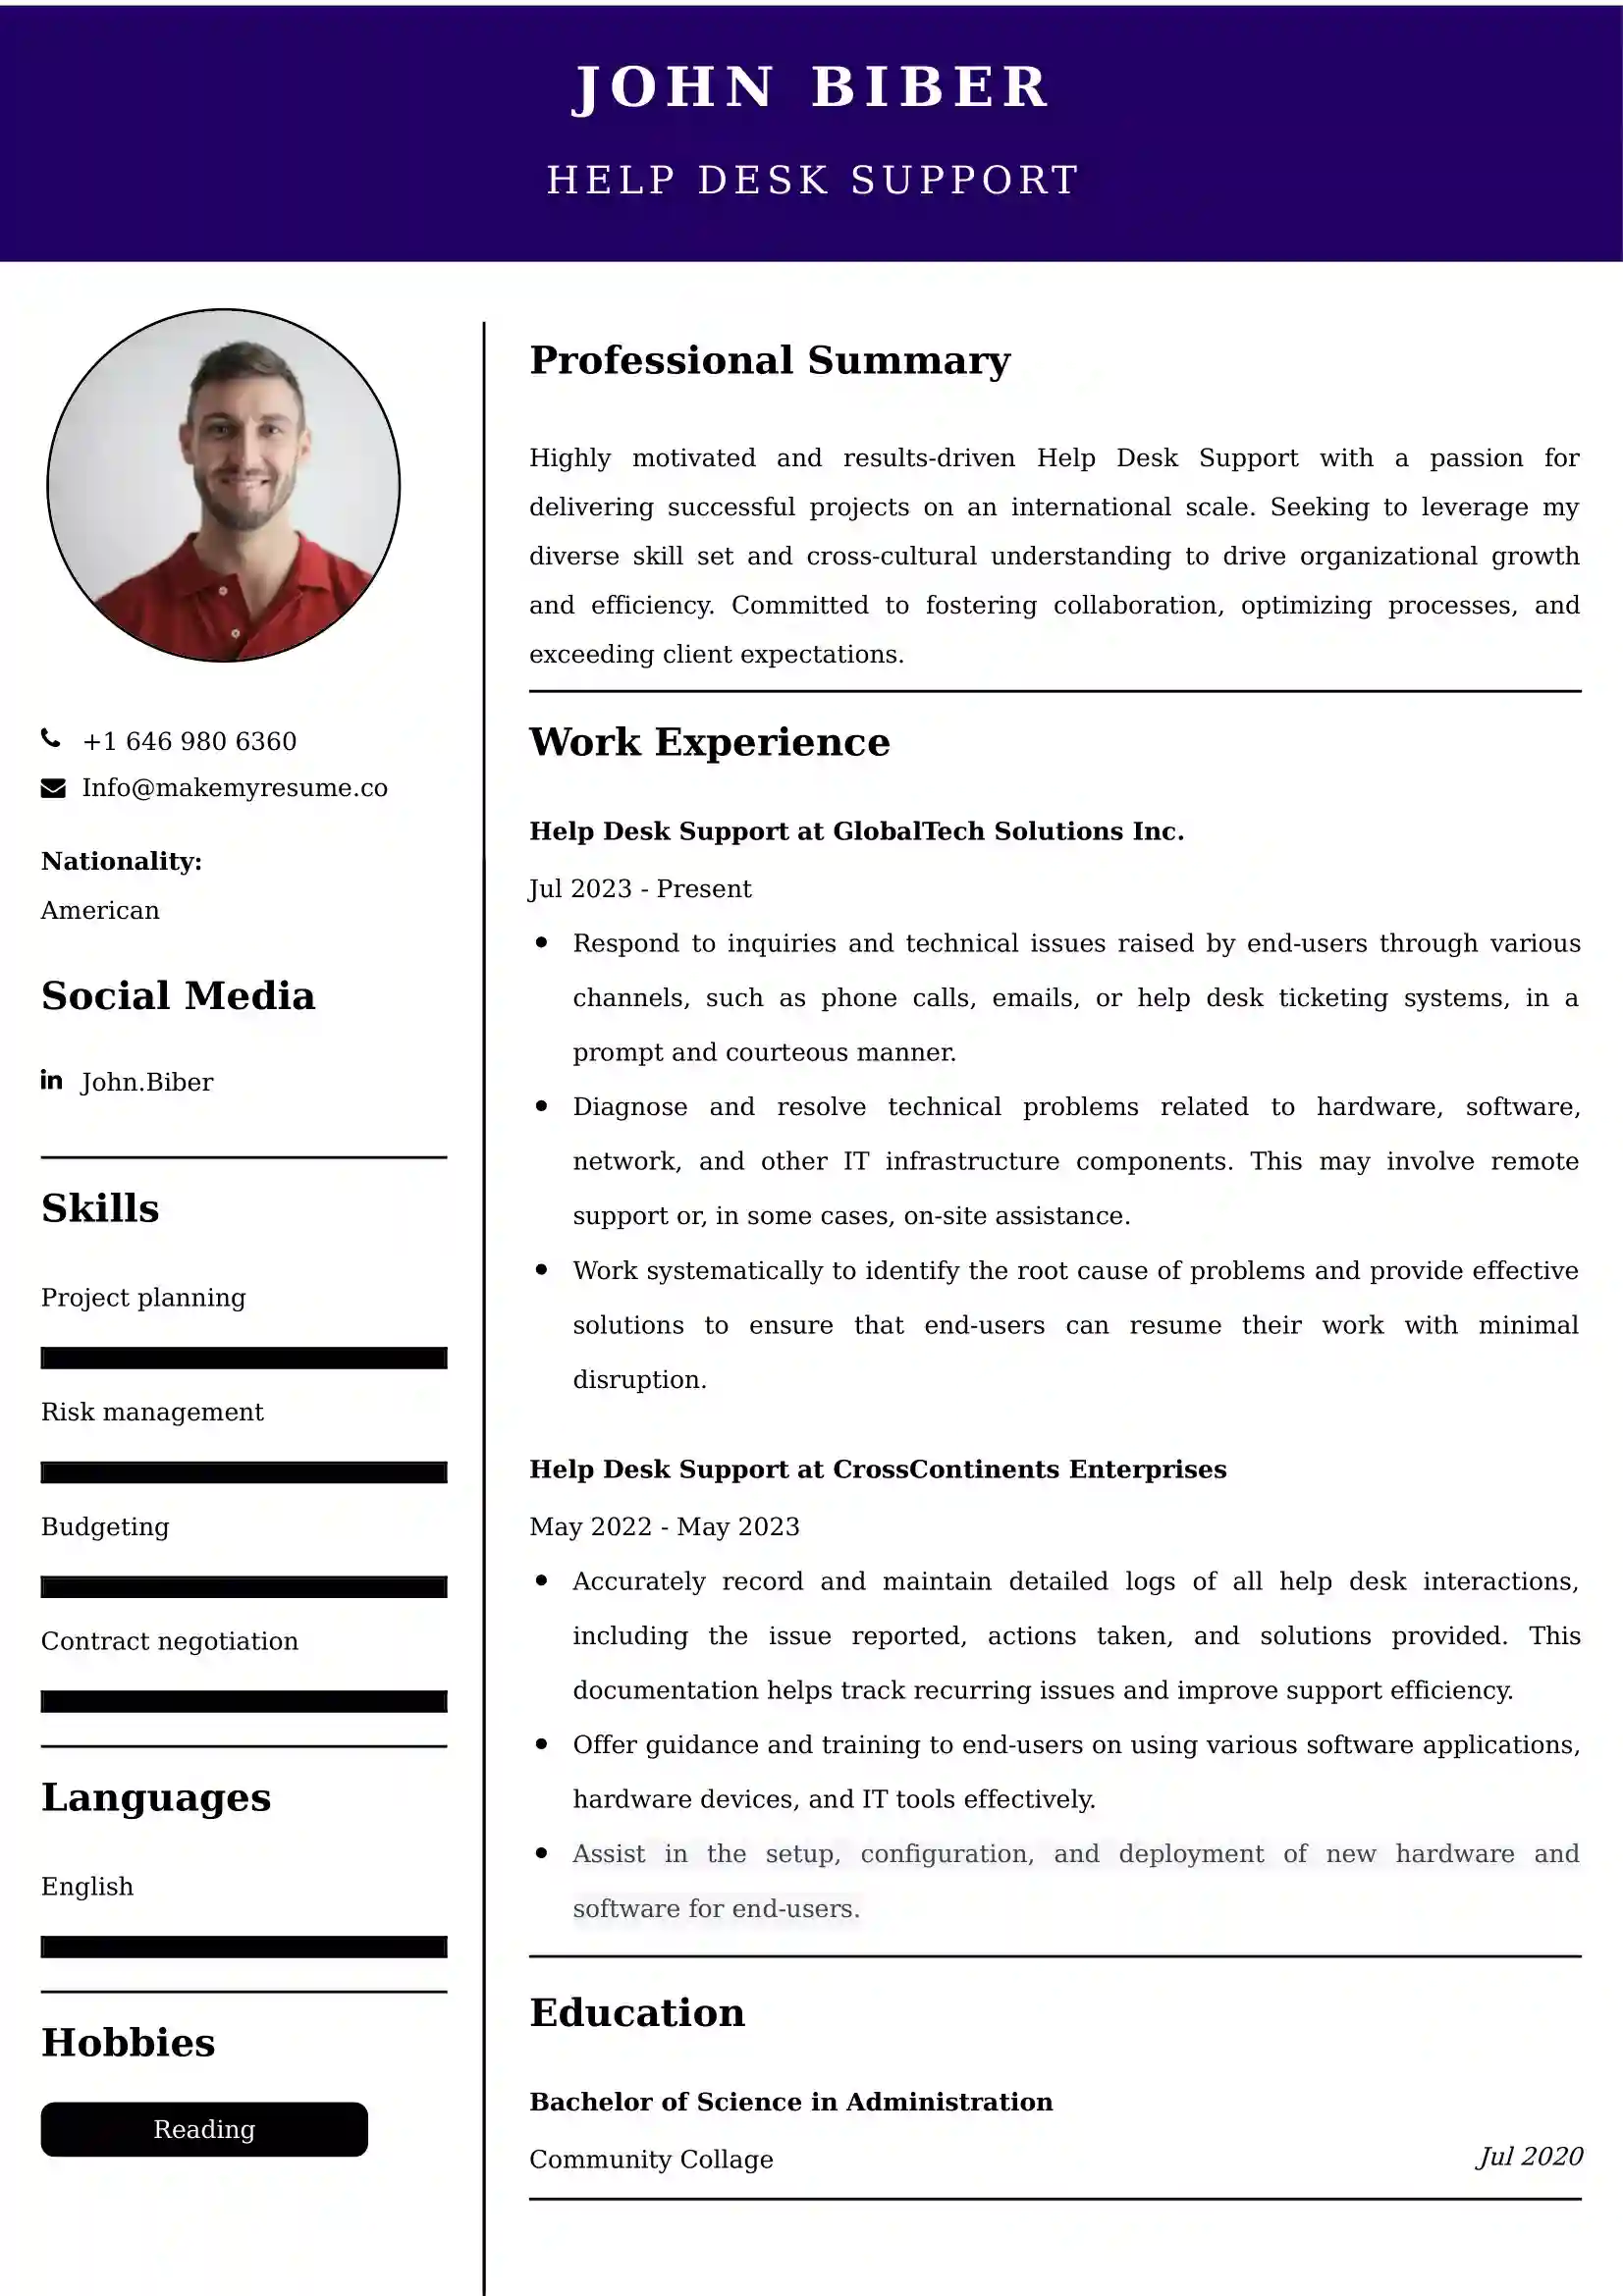 Help Desk Support Resume Examples - UK Format, Latest Template.